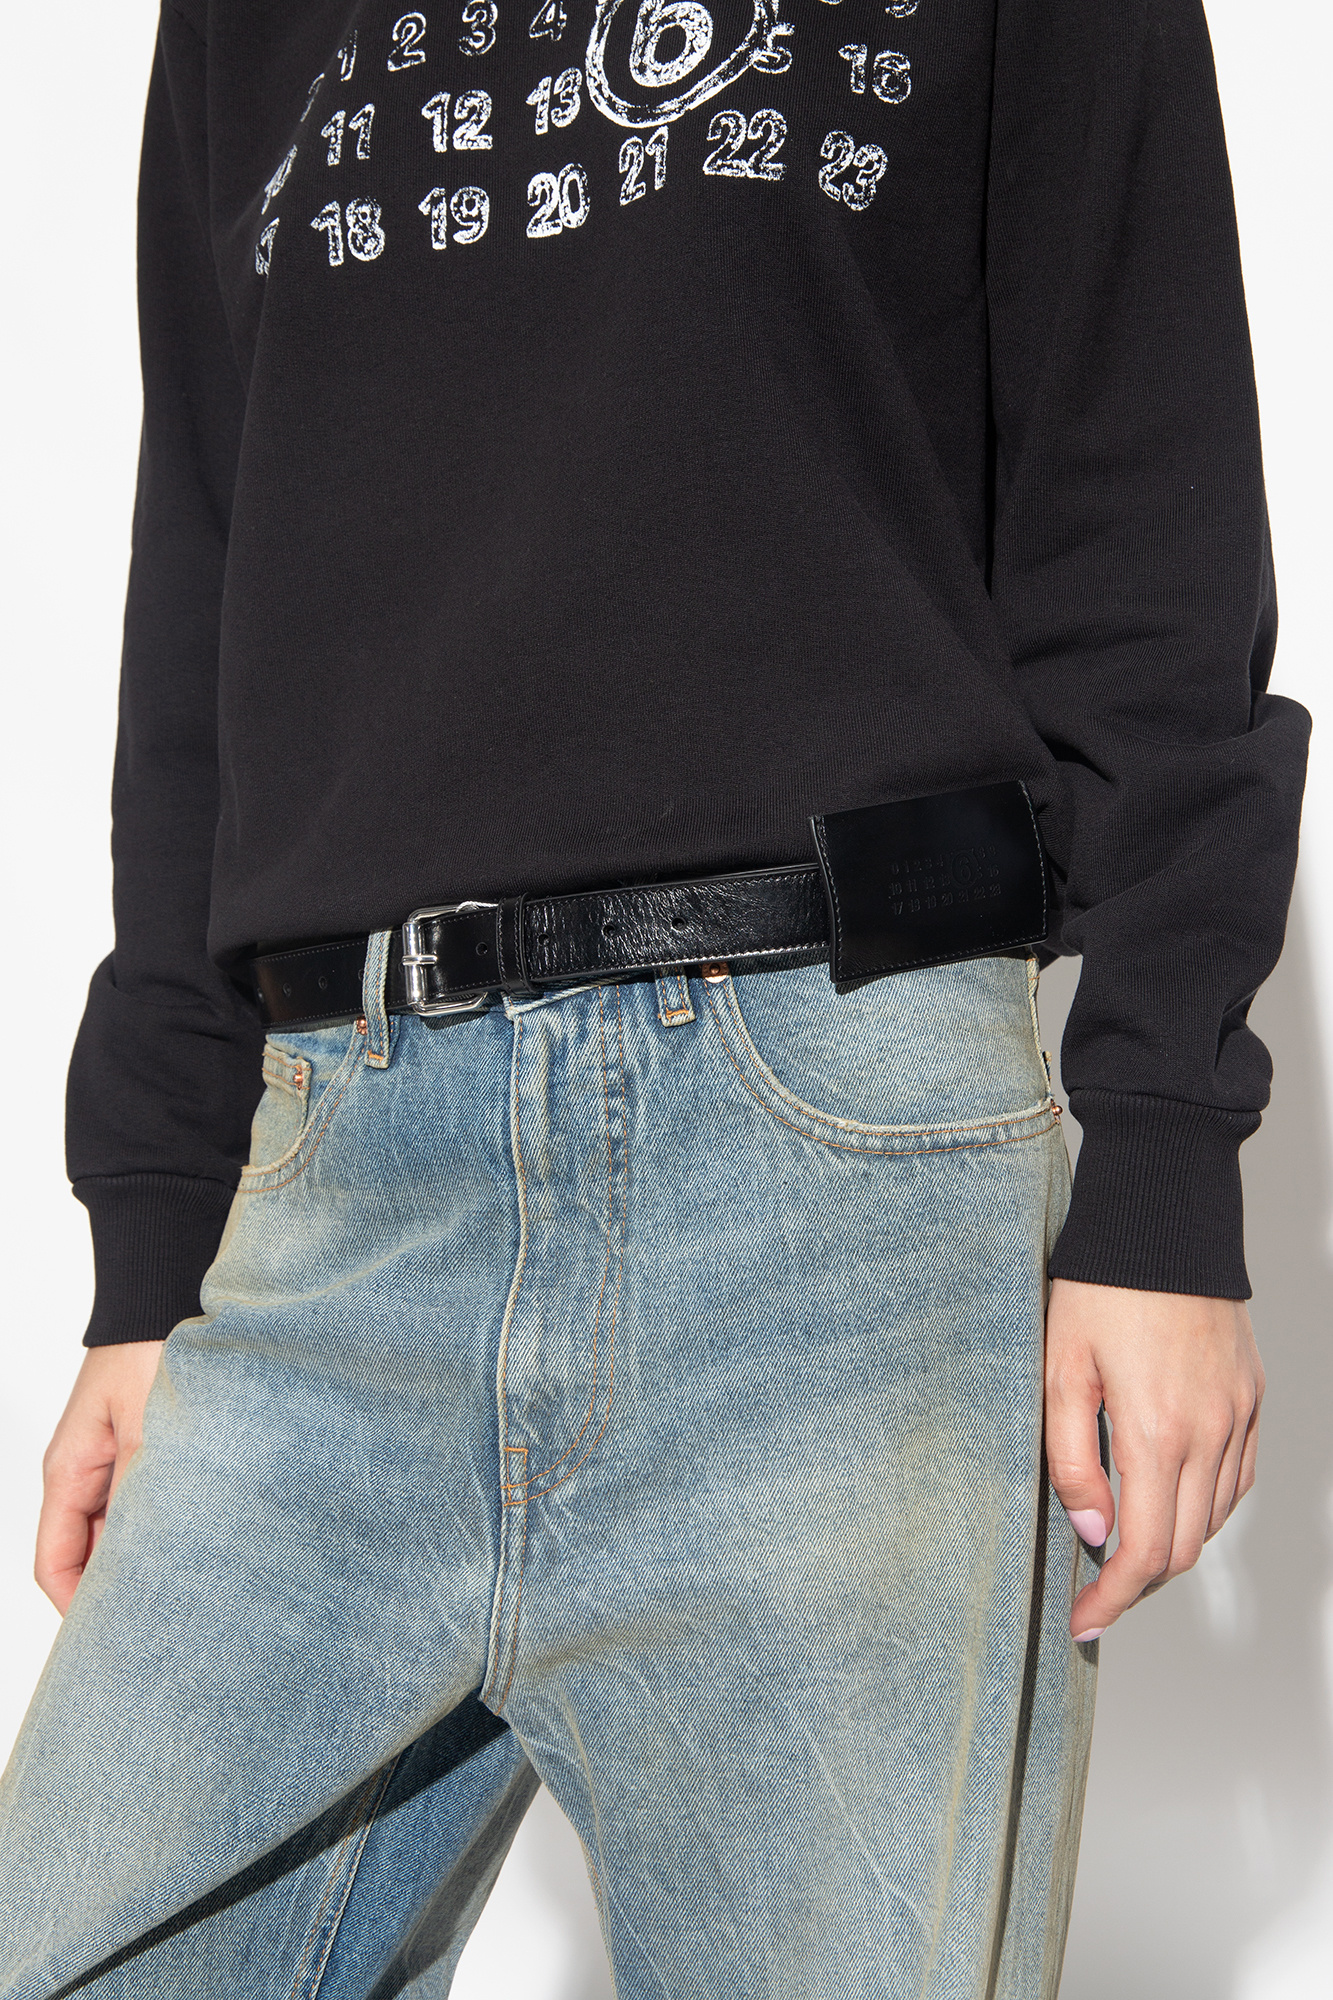 MM6 Maison Margiela Leather belt with card holder | Women's Accessories ...